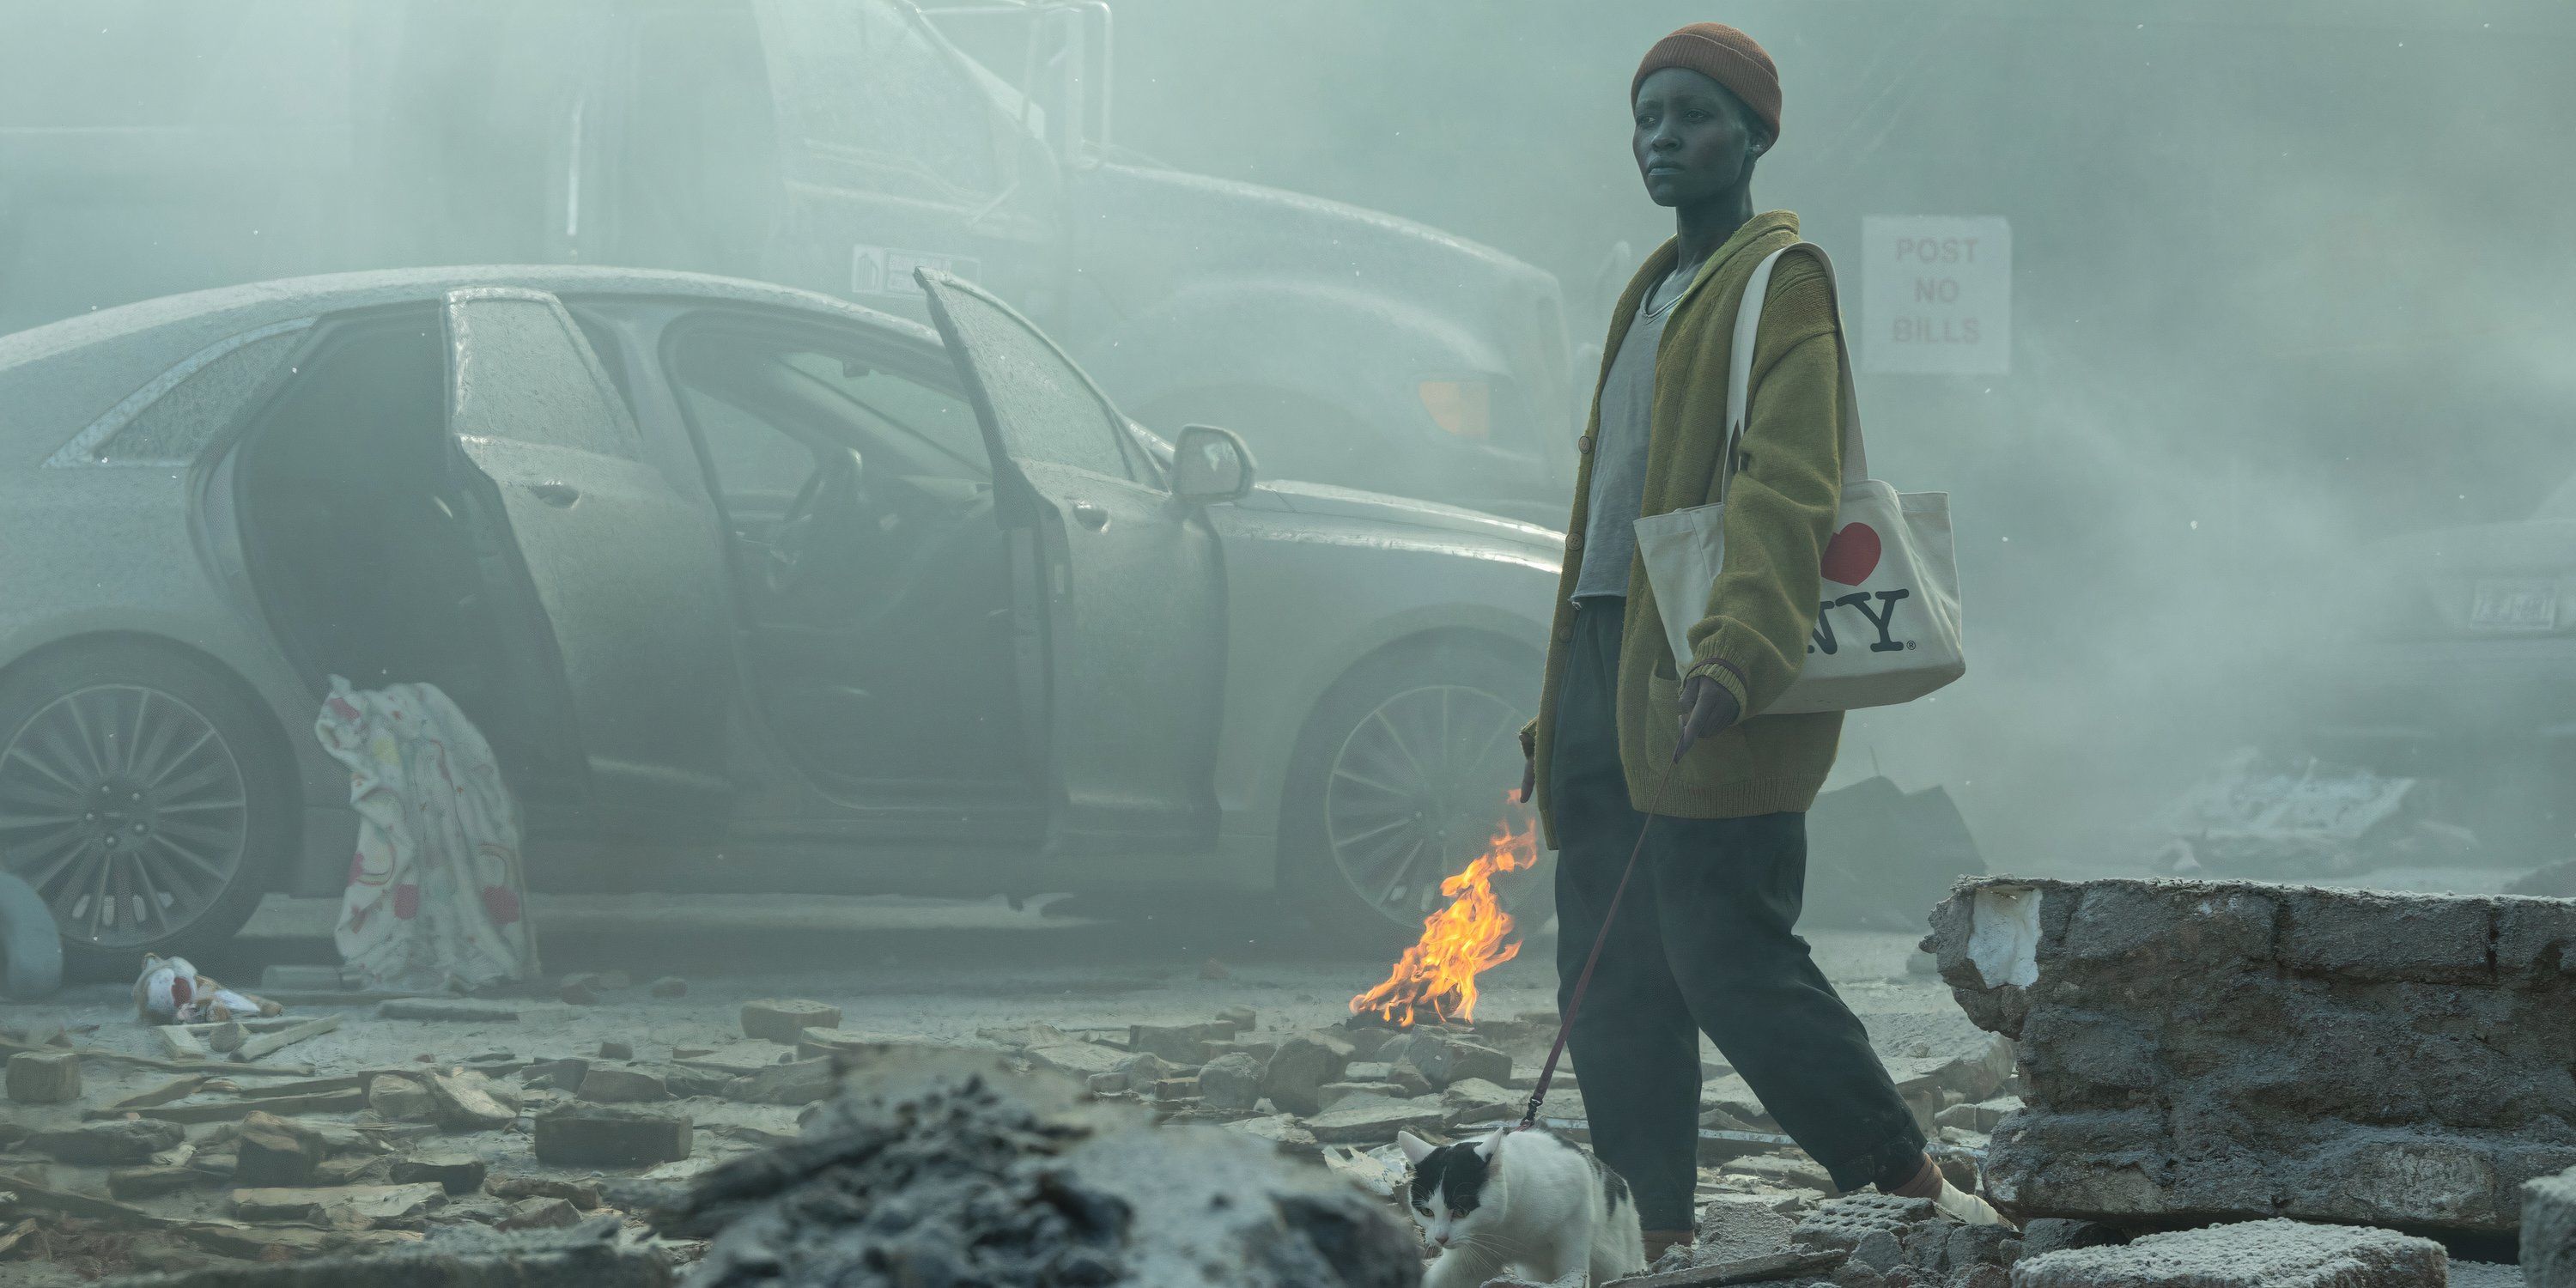 Lupita Nyong'o as Sam wanders through the destroyed city streets in A Quiet Place Day One still